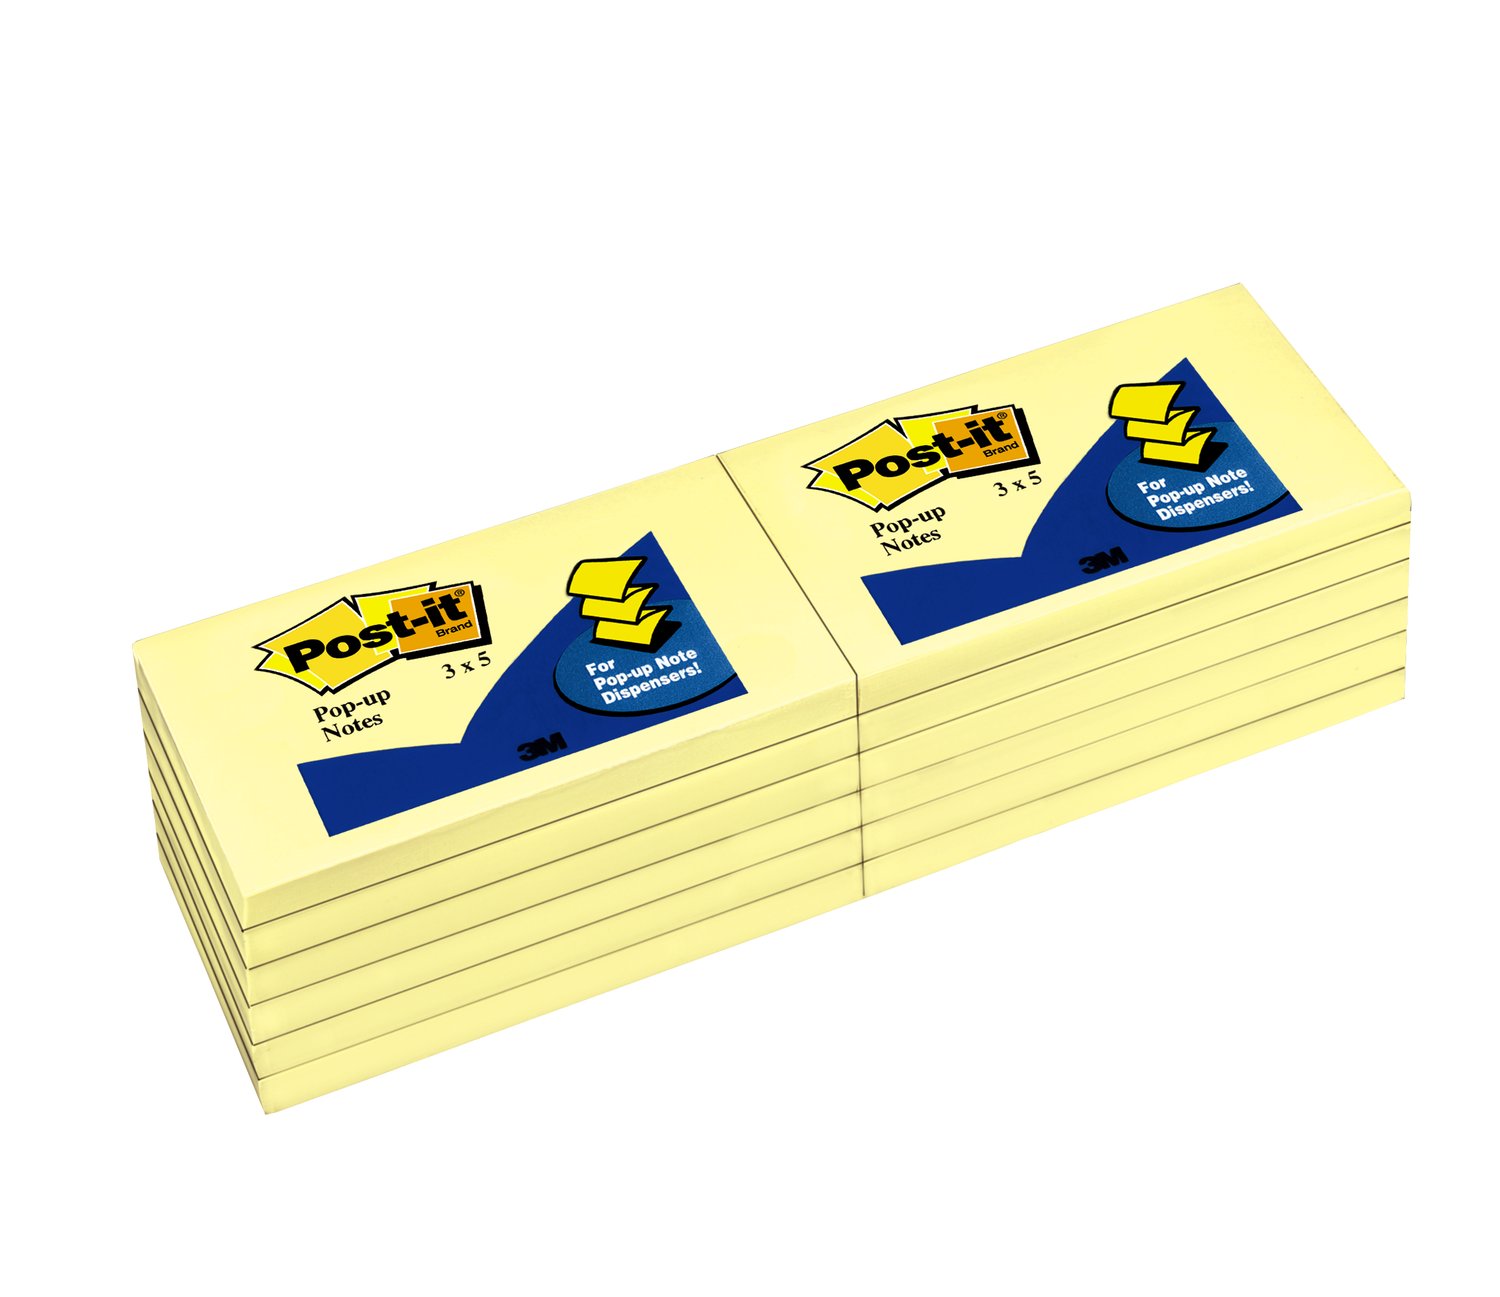 7000052310 - Post-it Dispenser Pop-up Notes R350-YW, 3 in x 5 in (7.62 cm x 12.7 cm), Canary Yellow